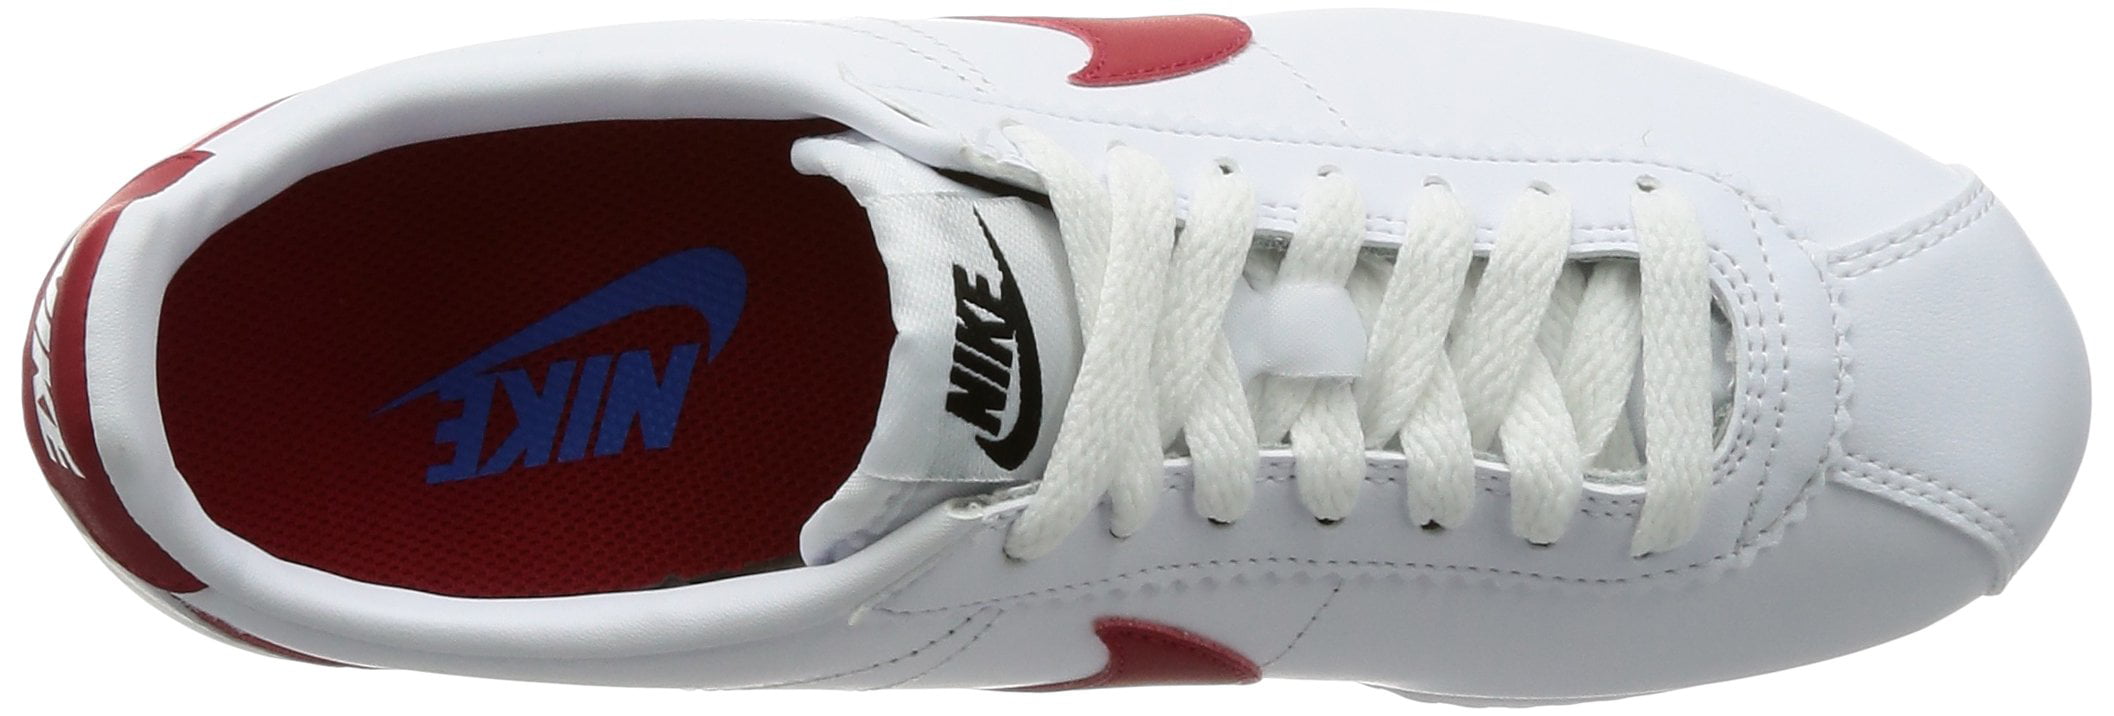 Nike Classic Leather Women's Low-Top Ladies Trainers Tennis Shoes Black or White (White/Varsity Red/Varsity Royal, - Walmart.com